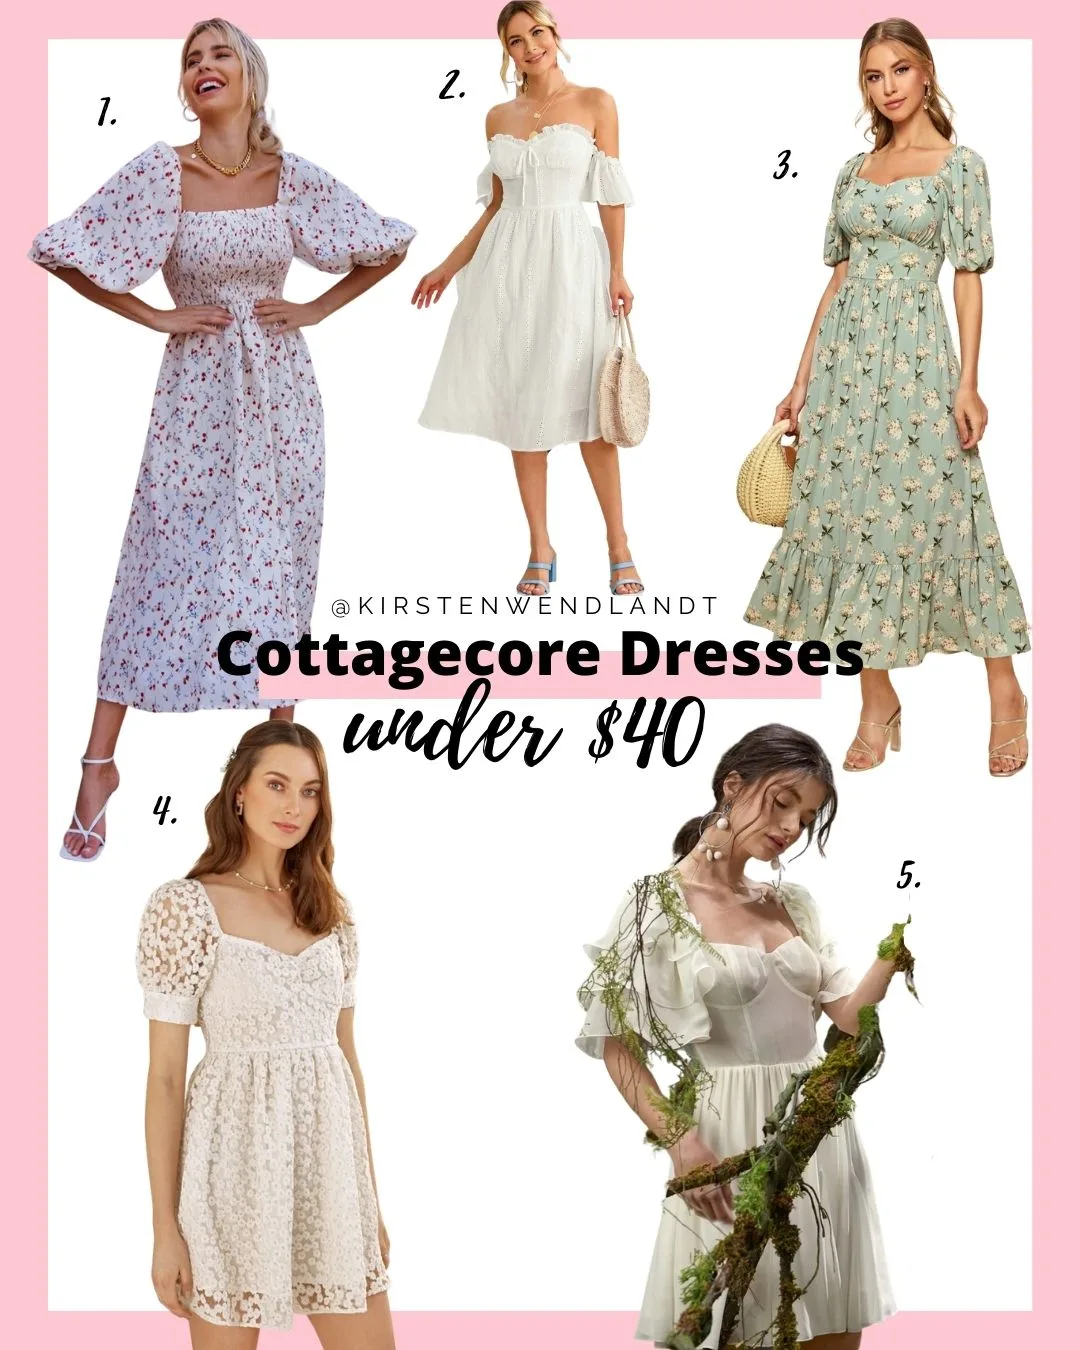 If you're smitten over the cottagecore aesthetic like me you'll definitely love this list list of cheap cottagecore dresses you can buy on a budget! Each of these adorable cottagecore dresses are $40 or under